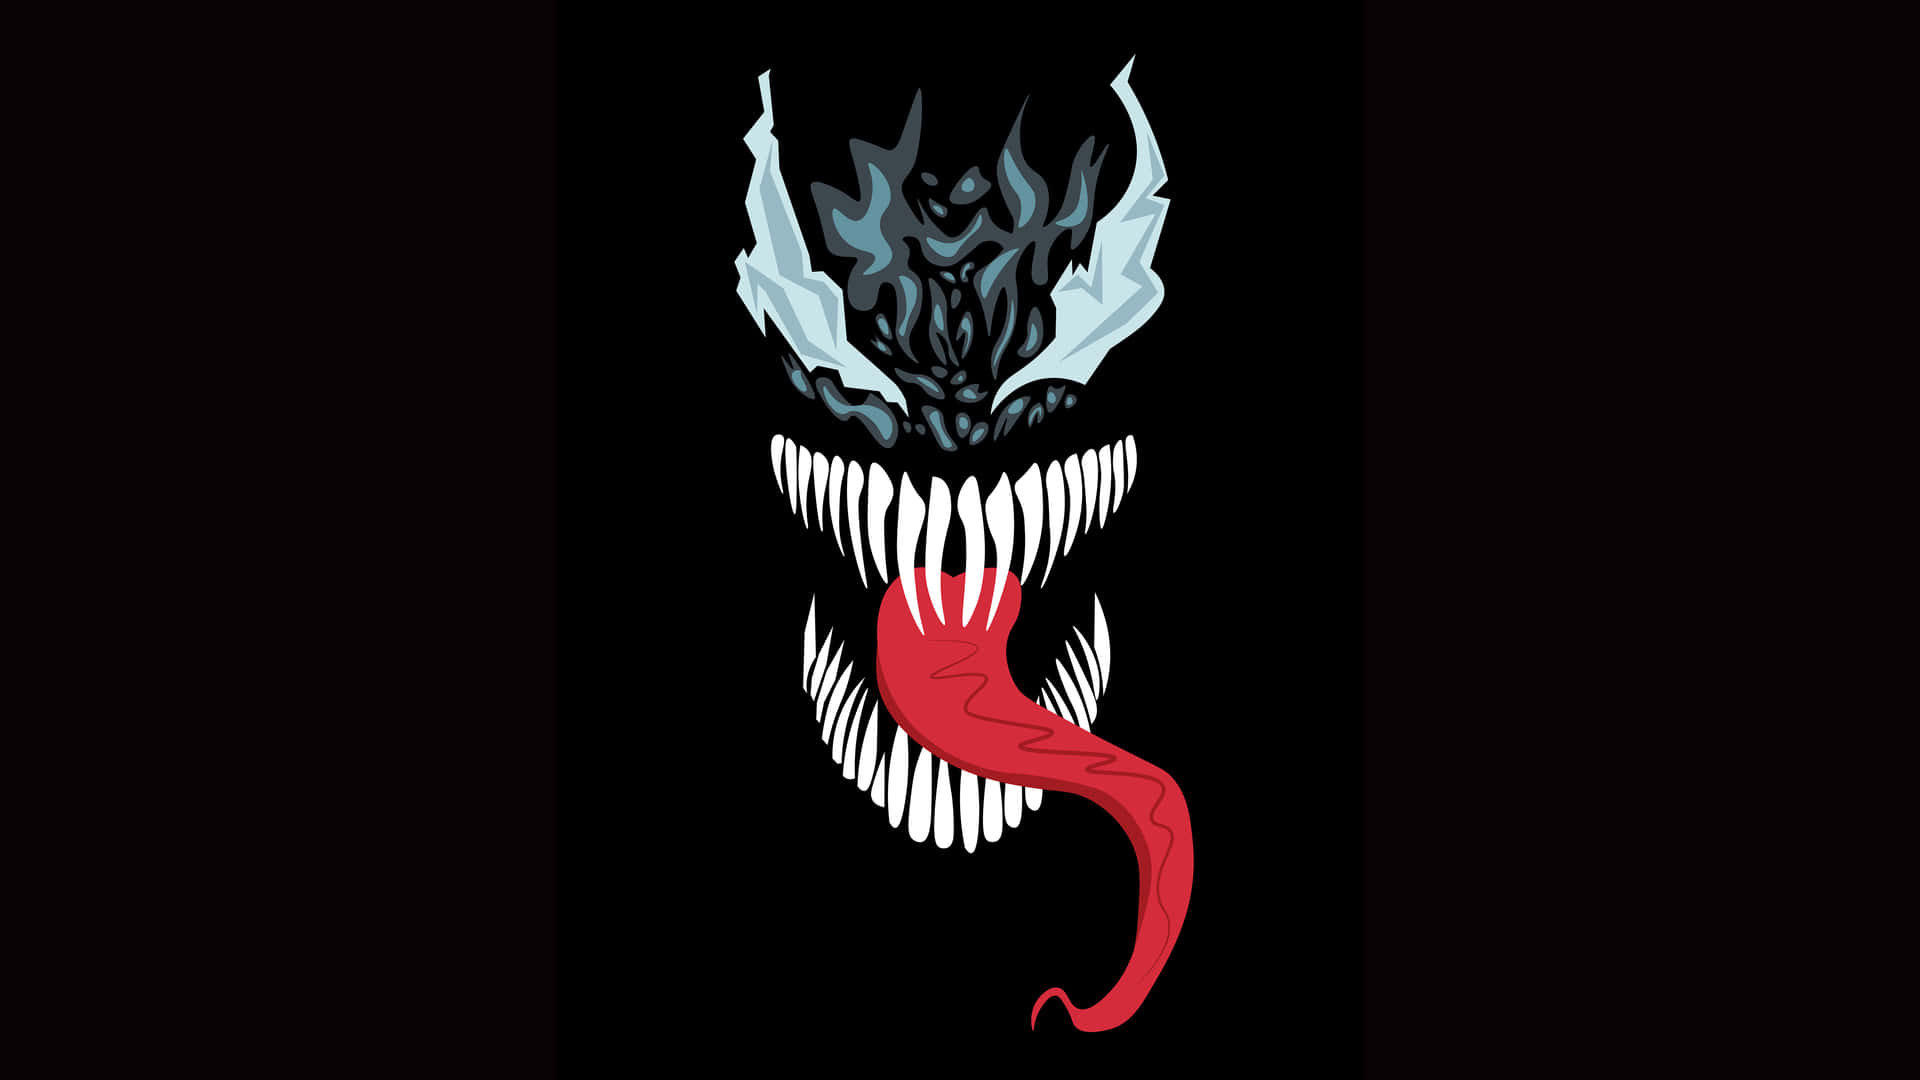 OLED Monitor Venom Head Tongue Out Wallpaper